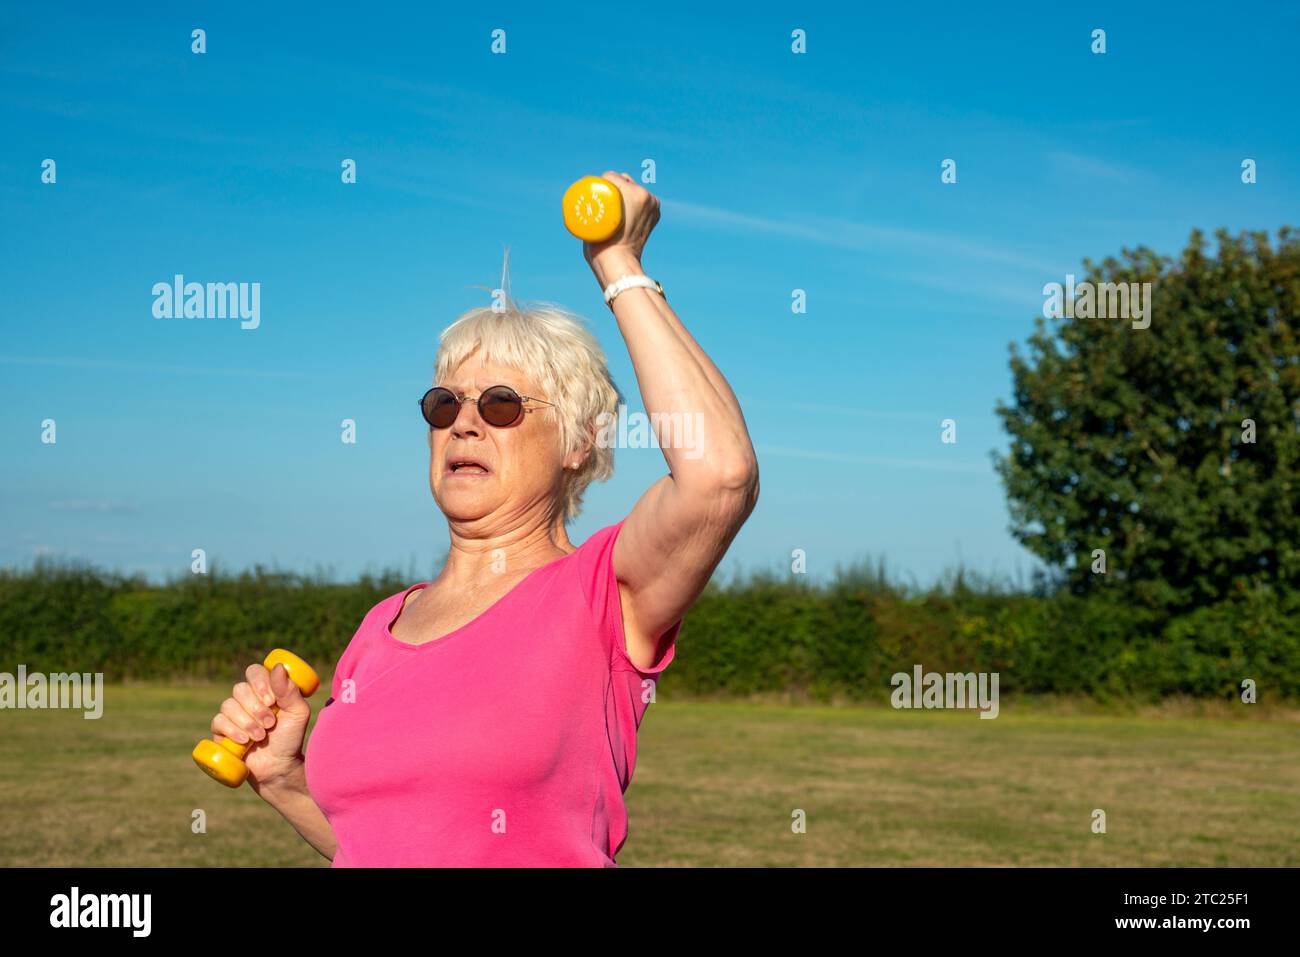 Elderly woman using dumbbell weights to keep fit Stock Photo